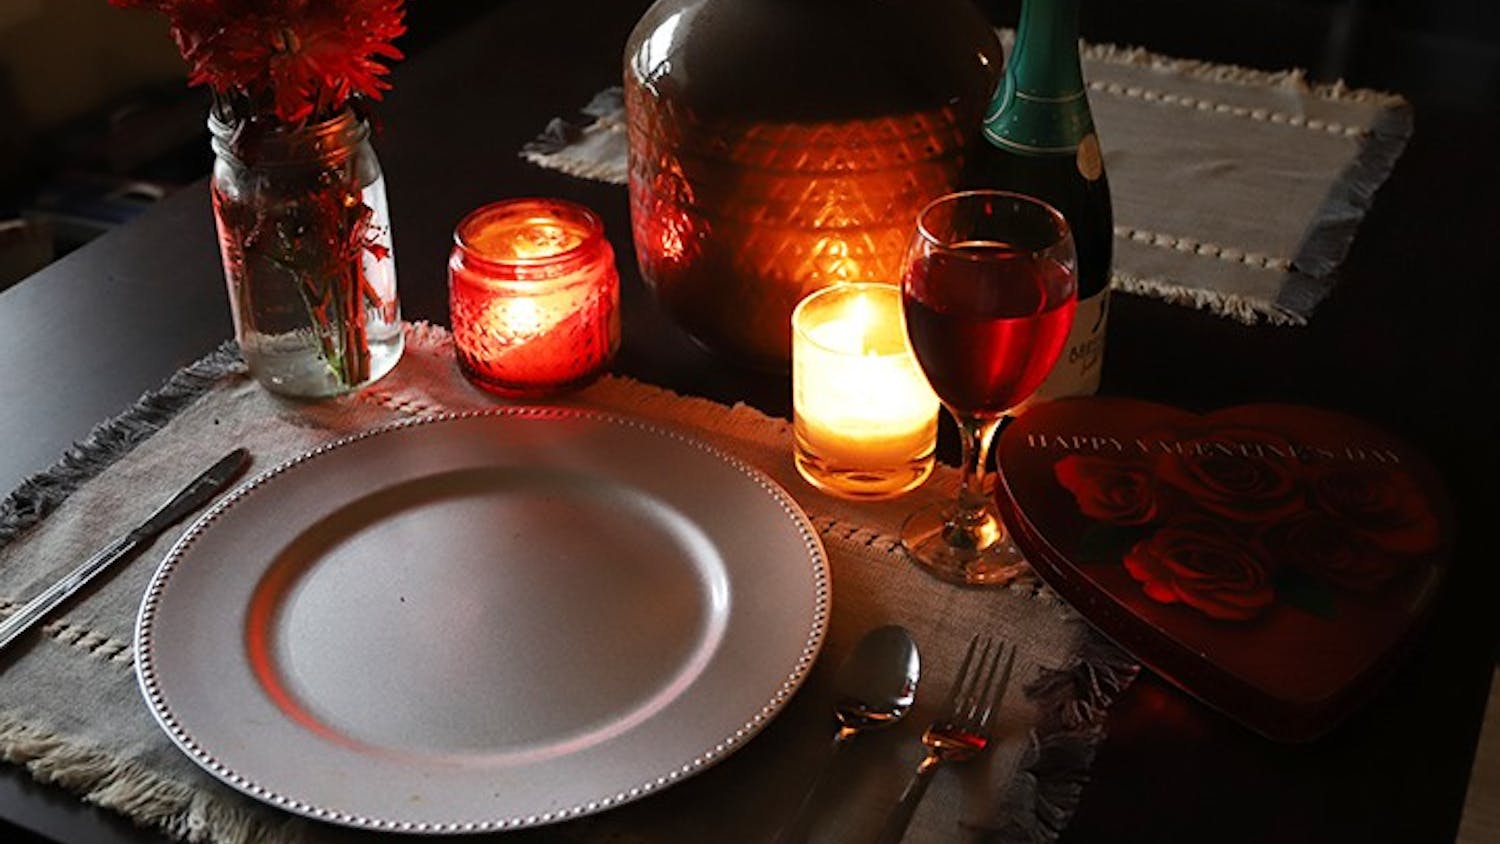 A candle-lit table that is set for one with Valentine's Day paraphernalia surrounding the tableware.